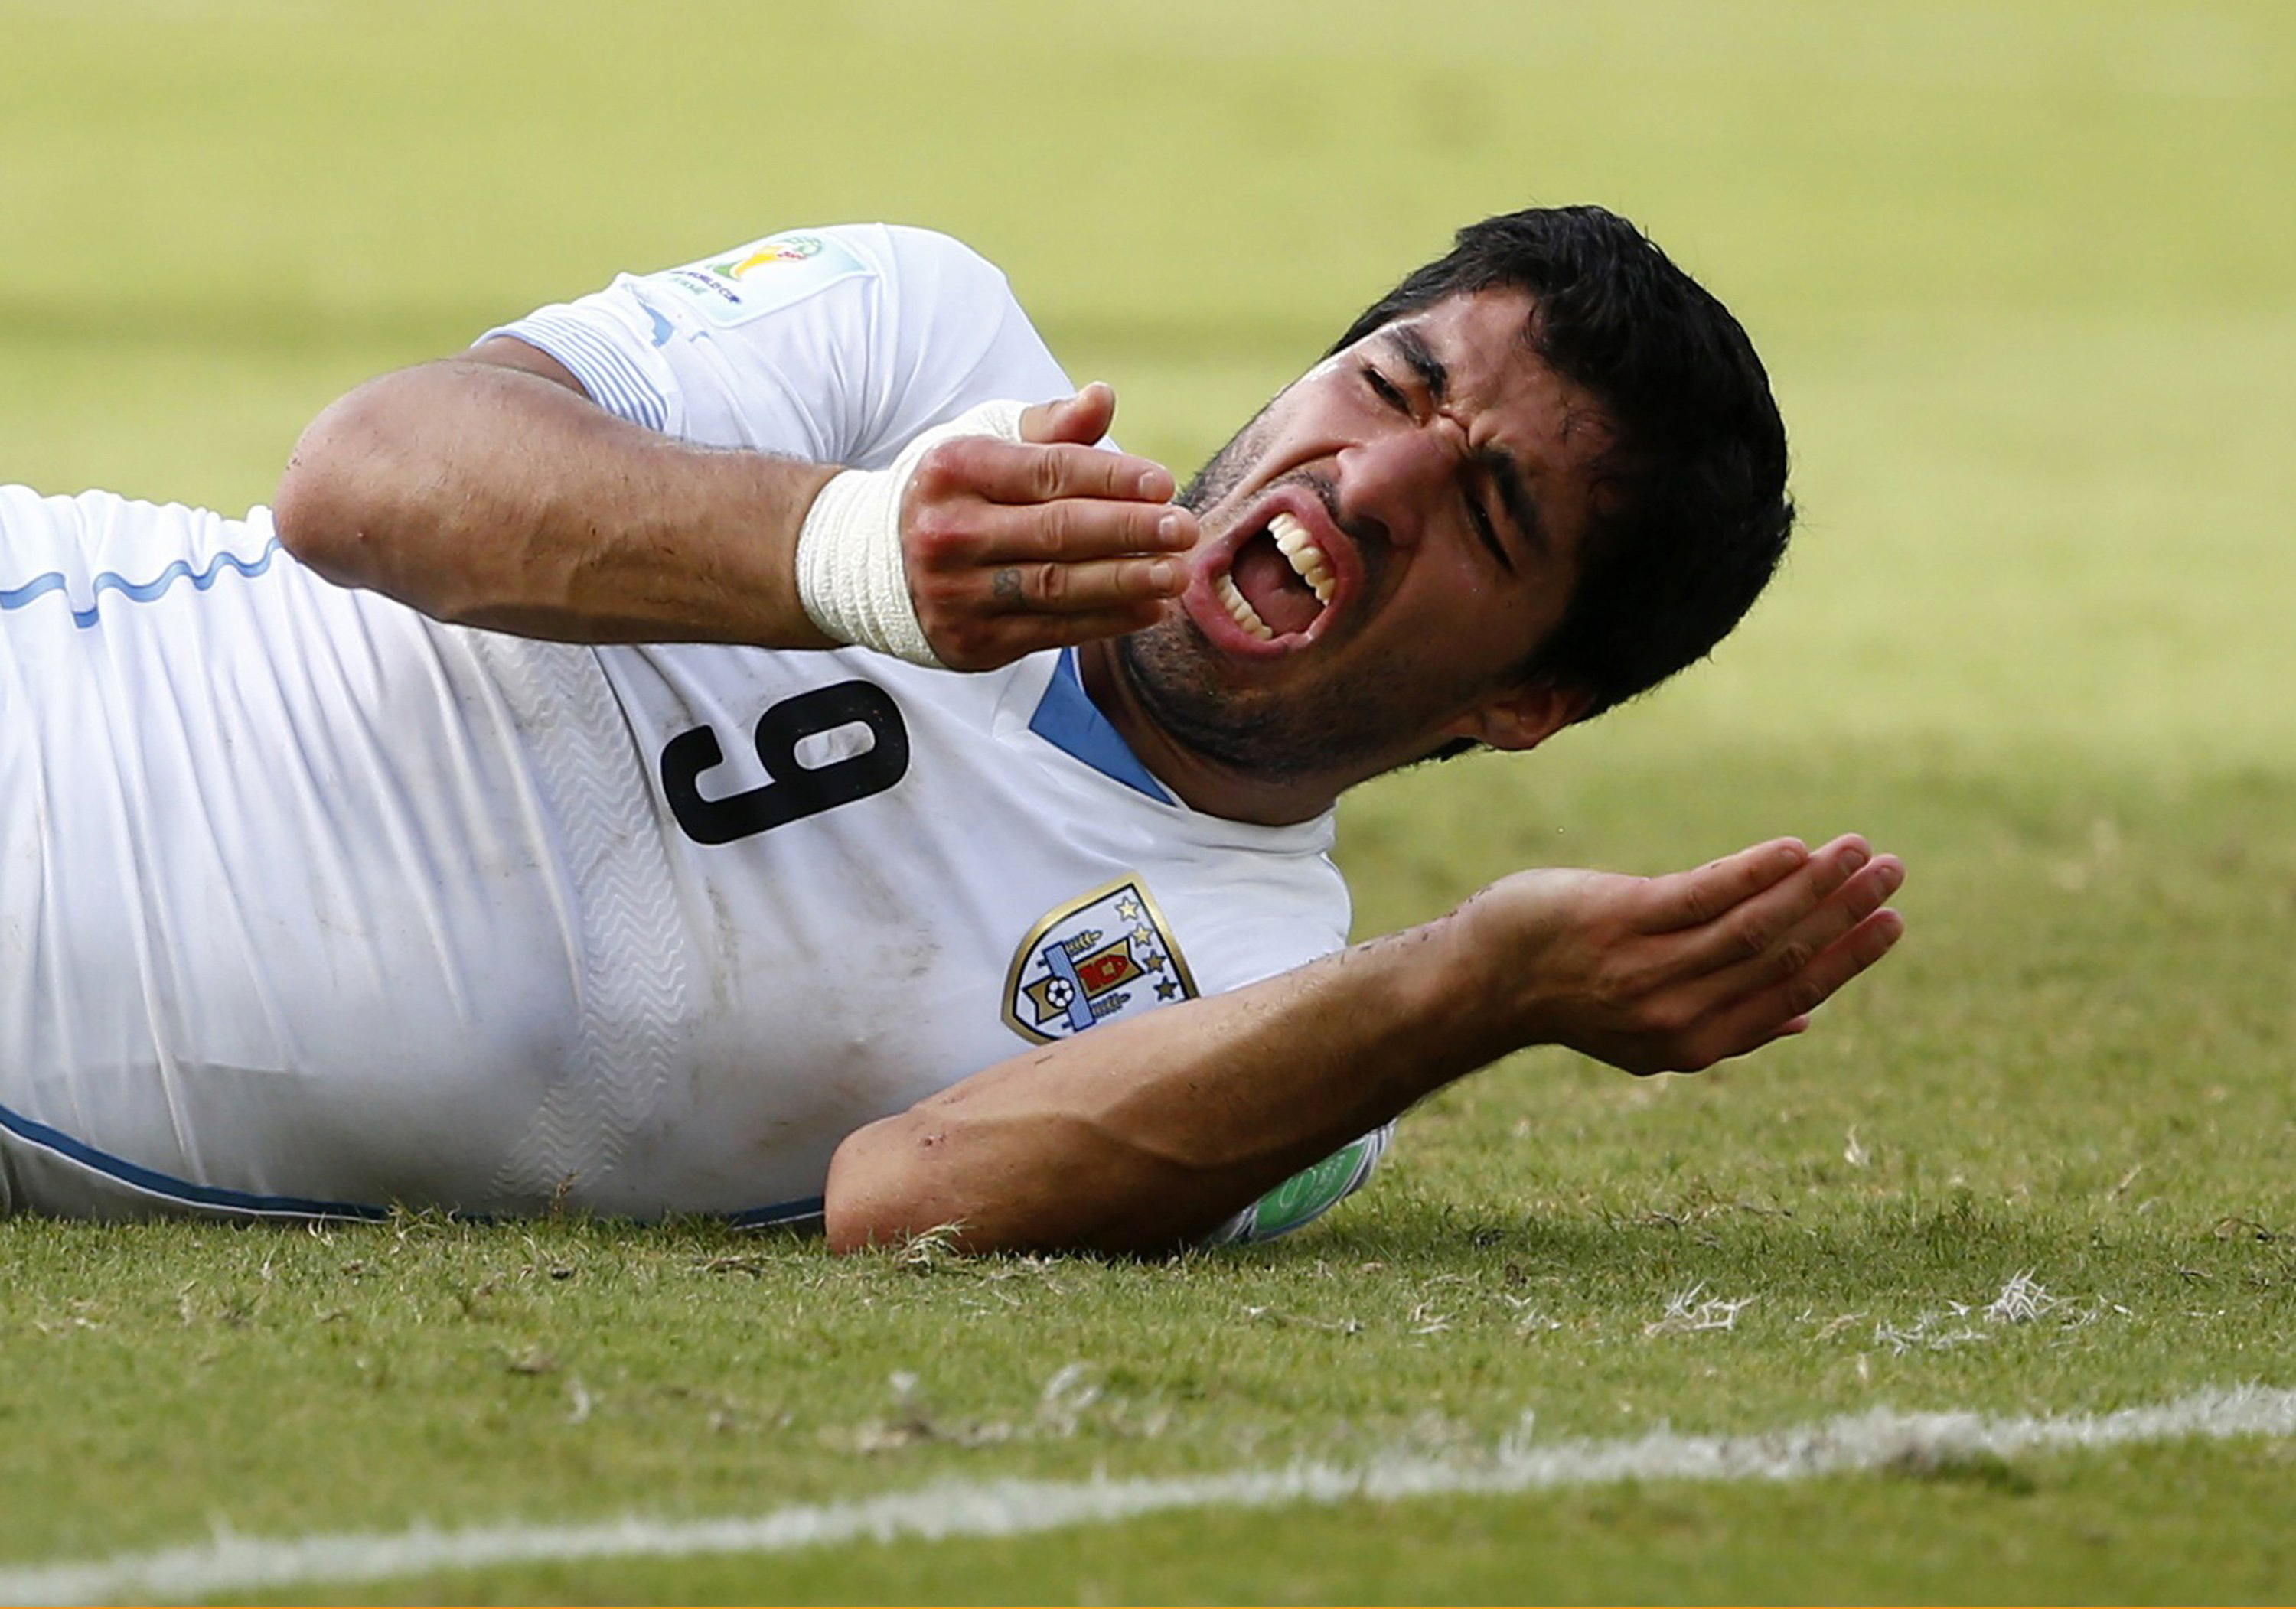 Uruguay's Luis Suarez reacts after clashing with Italy's Giorgio Chiellini during their 2014 World Cup Group D soccer match at the Dunas arena in Natal, Brazil on June 24, 2014.